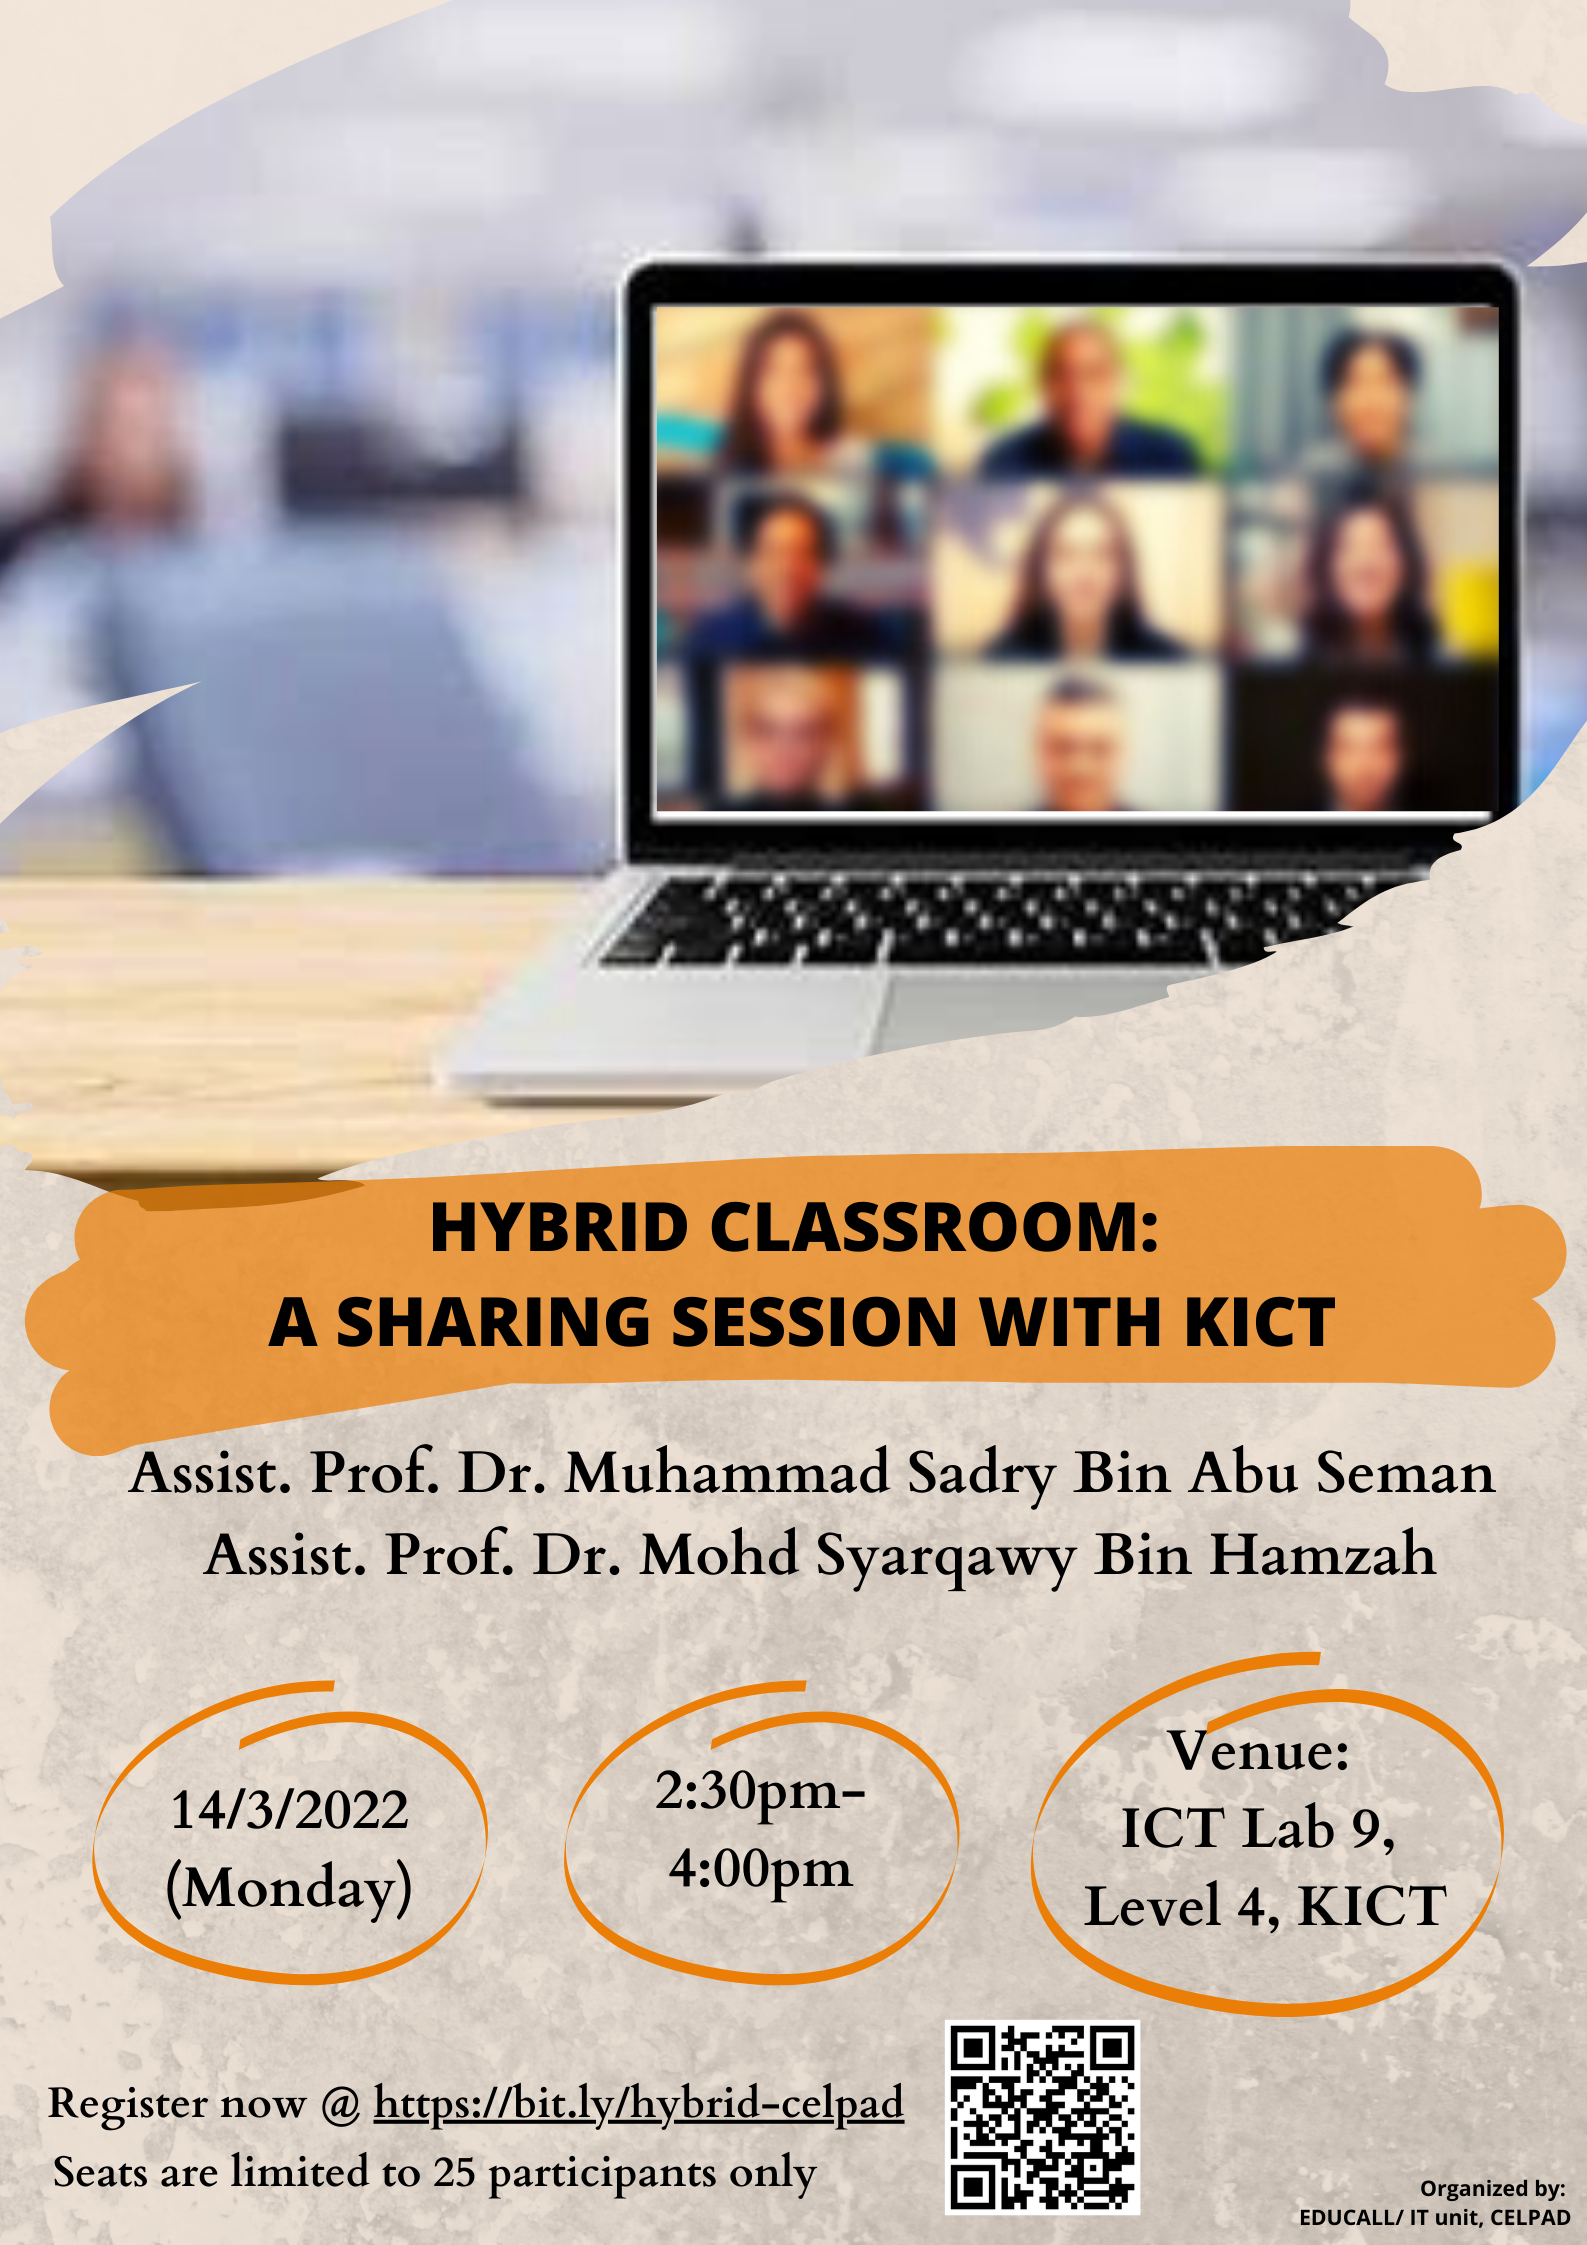 Hybrid Classroom: A Sharing Session with KICT